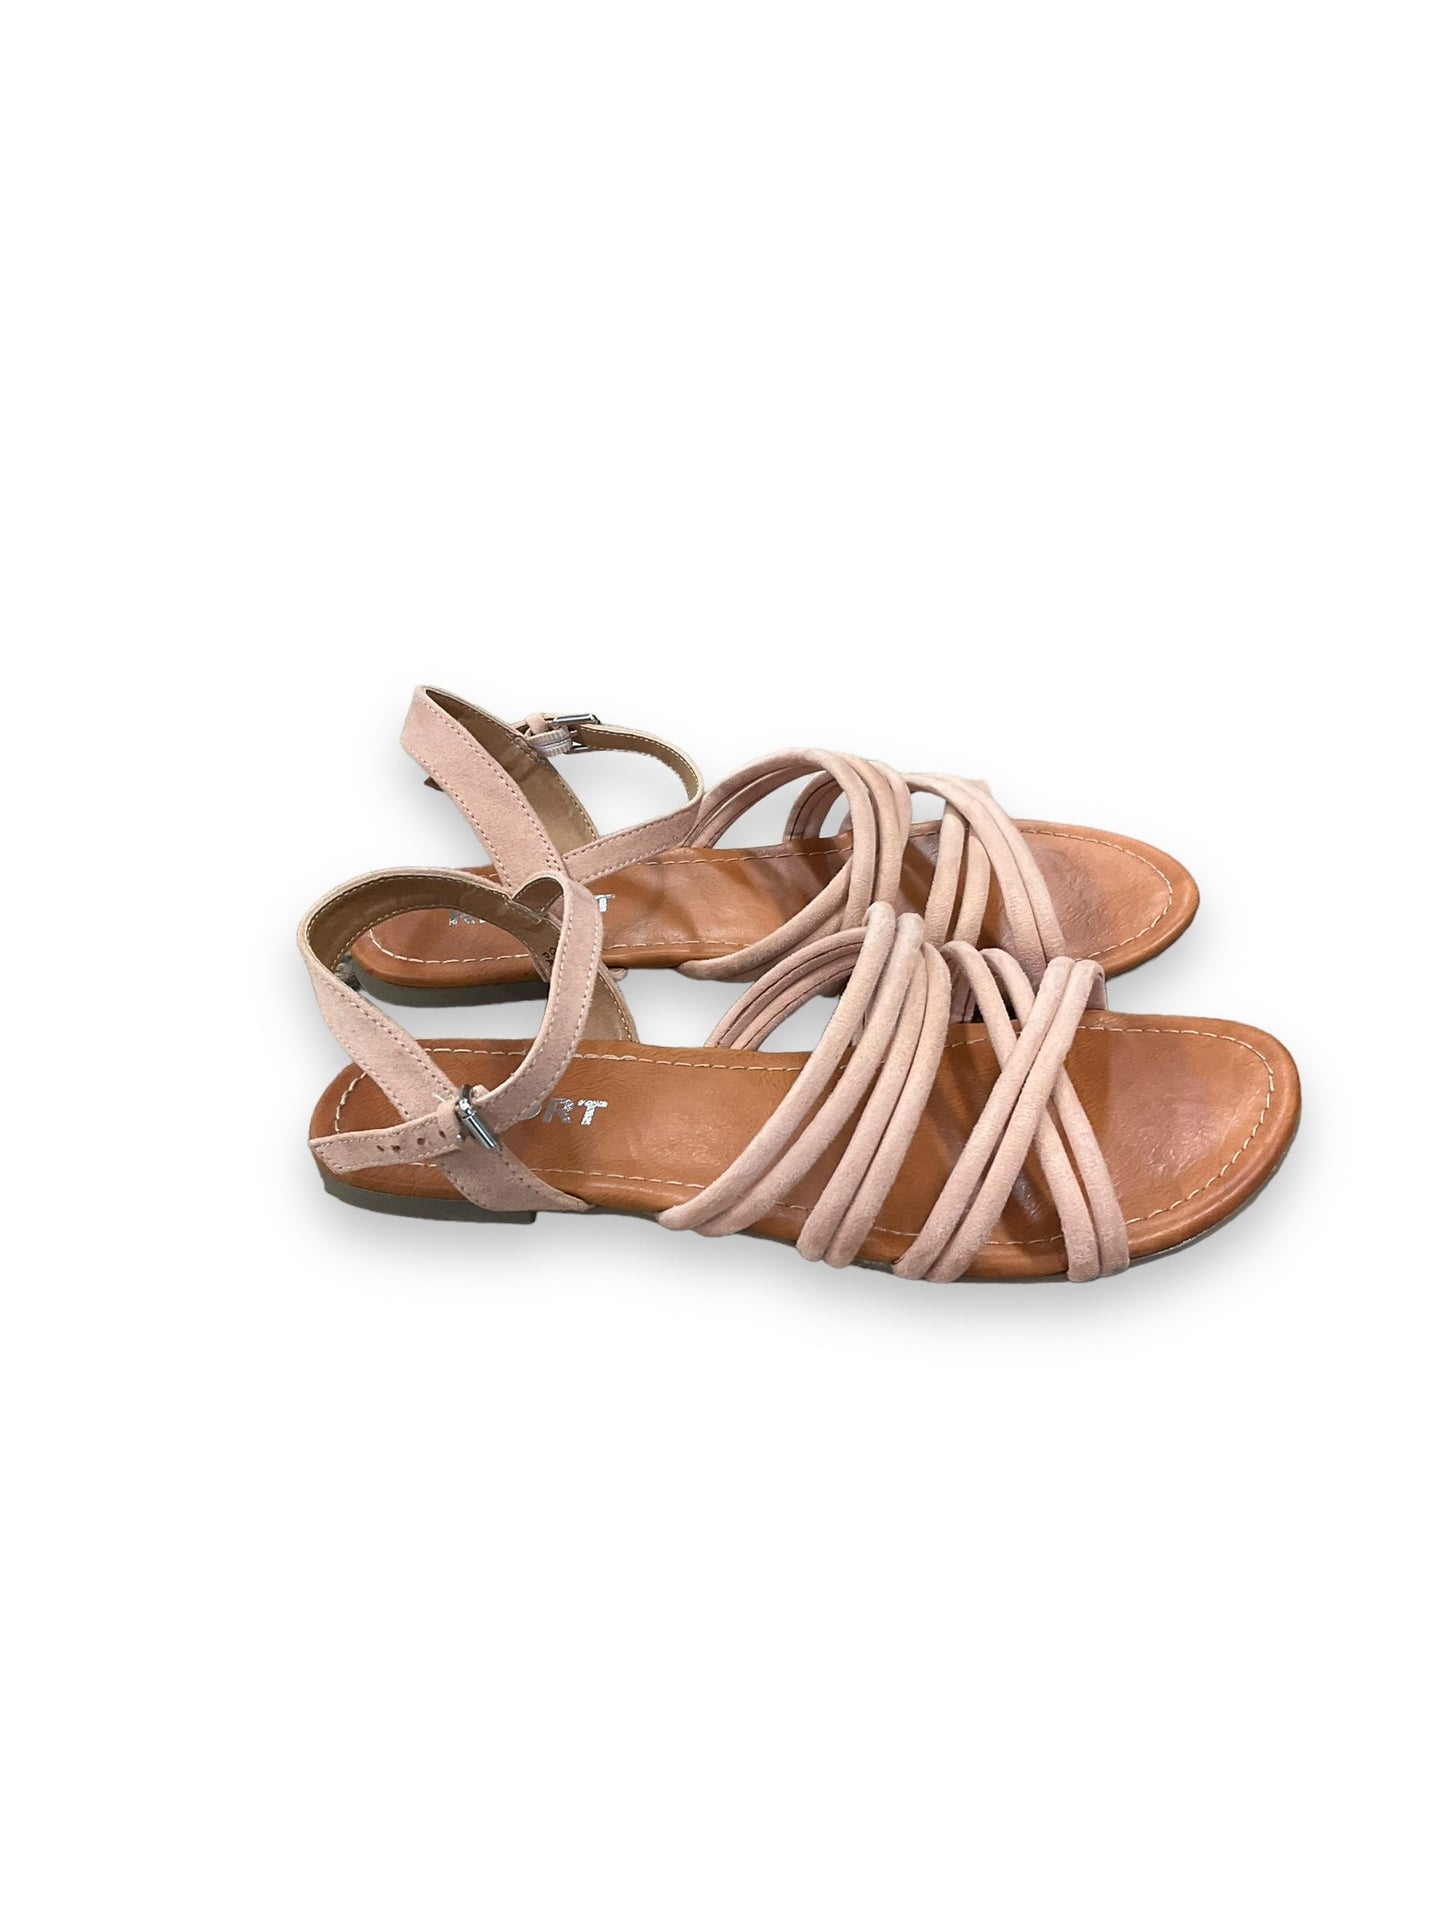 Brown & Pink Sandals Flats Report, Size 8.5